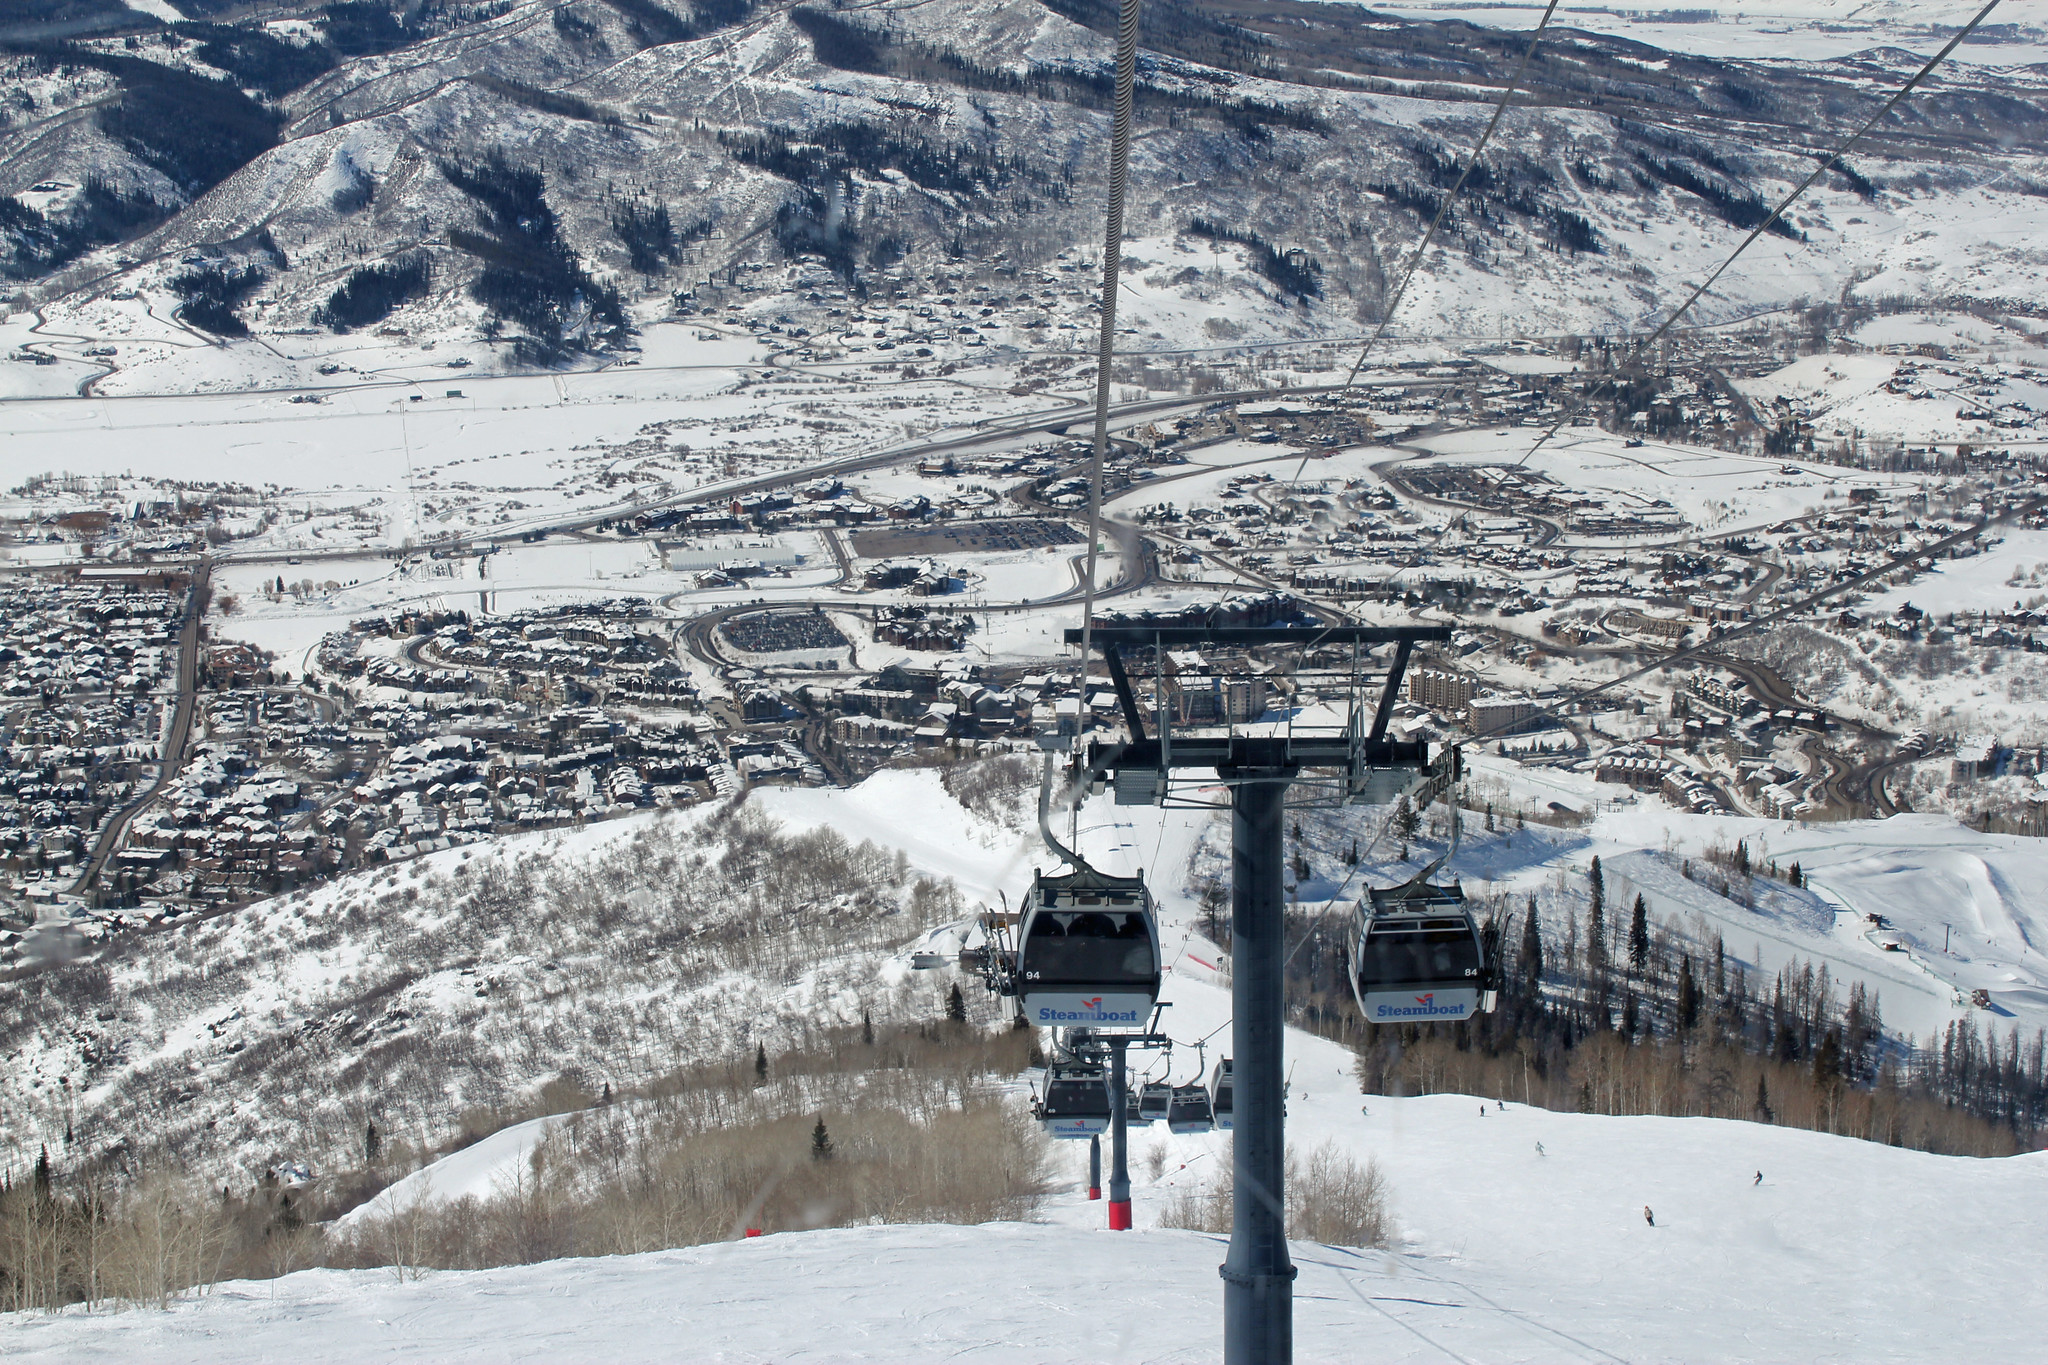 15 Things to do in Steamboat Springs, Colorado